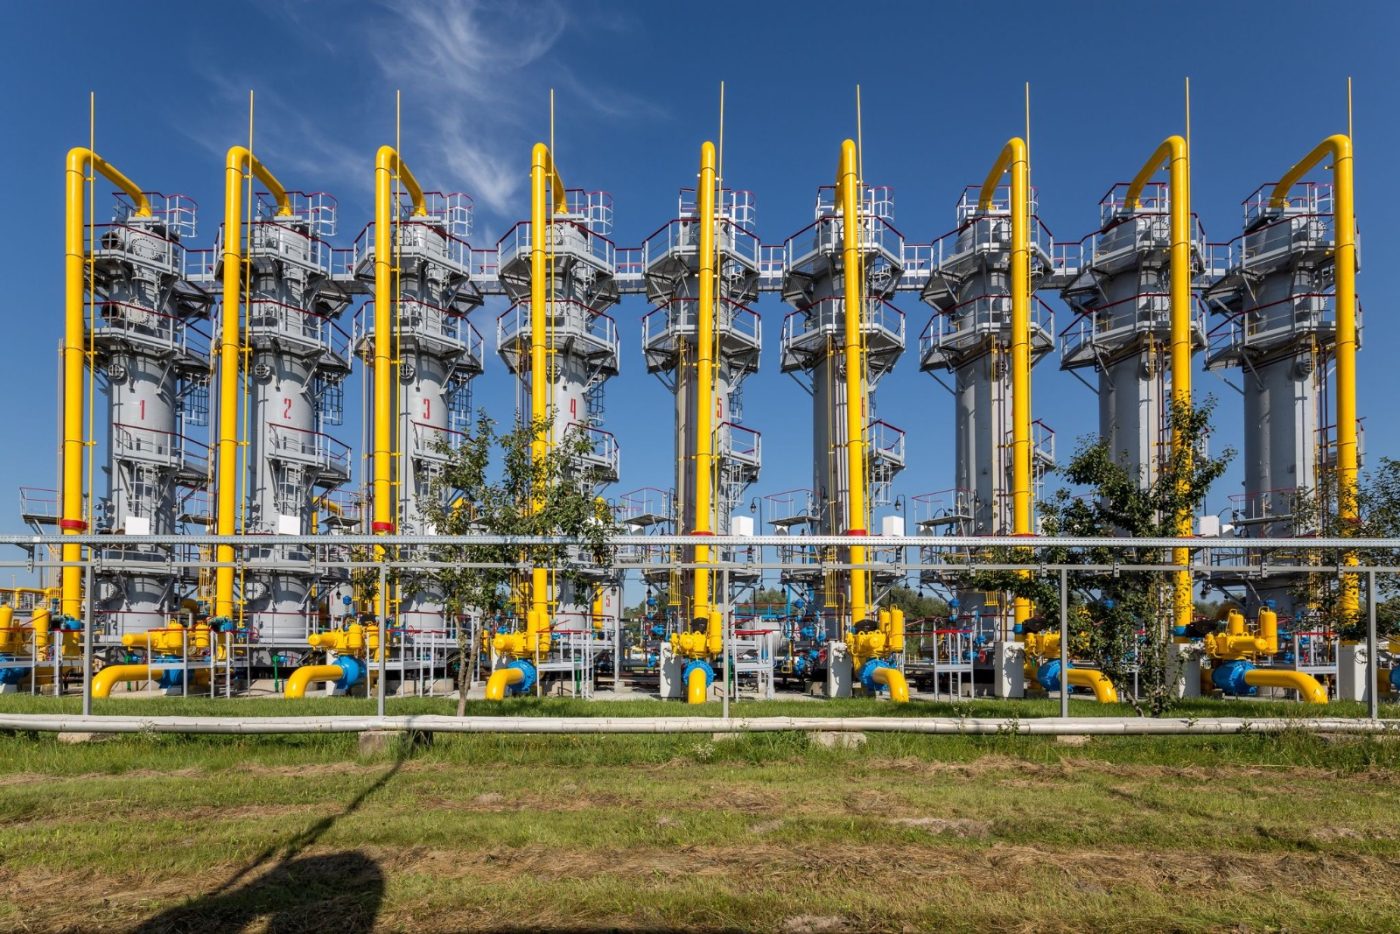 Photo: The Gas Transmission System Operator of Ukraine is a state-owned and provised transmission of natural gas to Ukrainian consumers and the European Union. Credit: Gas Transmission System Operator of Ukraine via Facebook https://www.facebook.com/gas.tso.ua/photos/a.2282898508469973/6092879817471804/